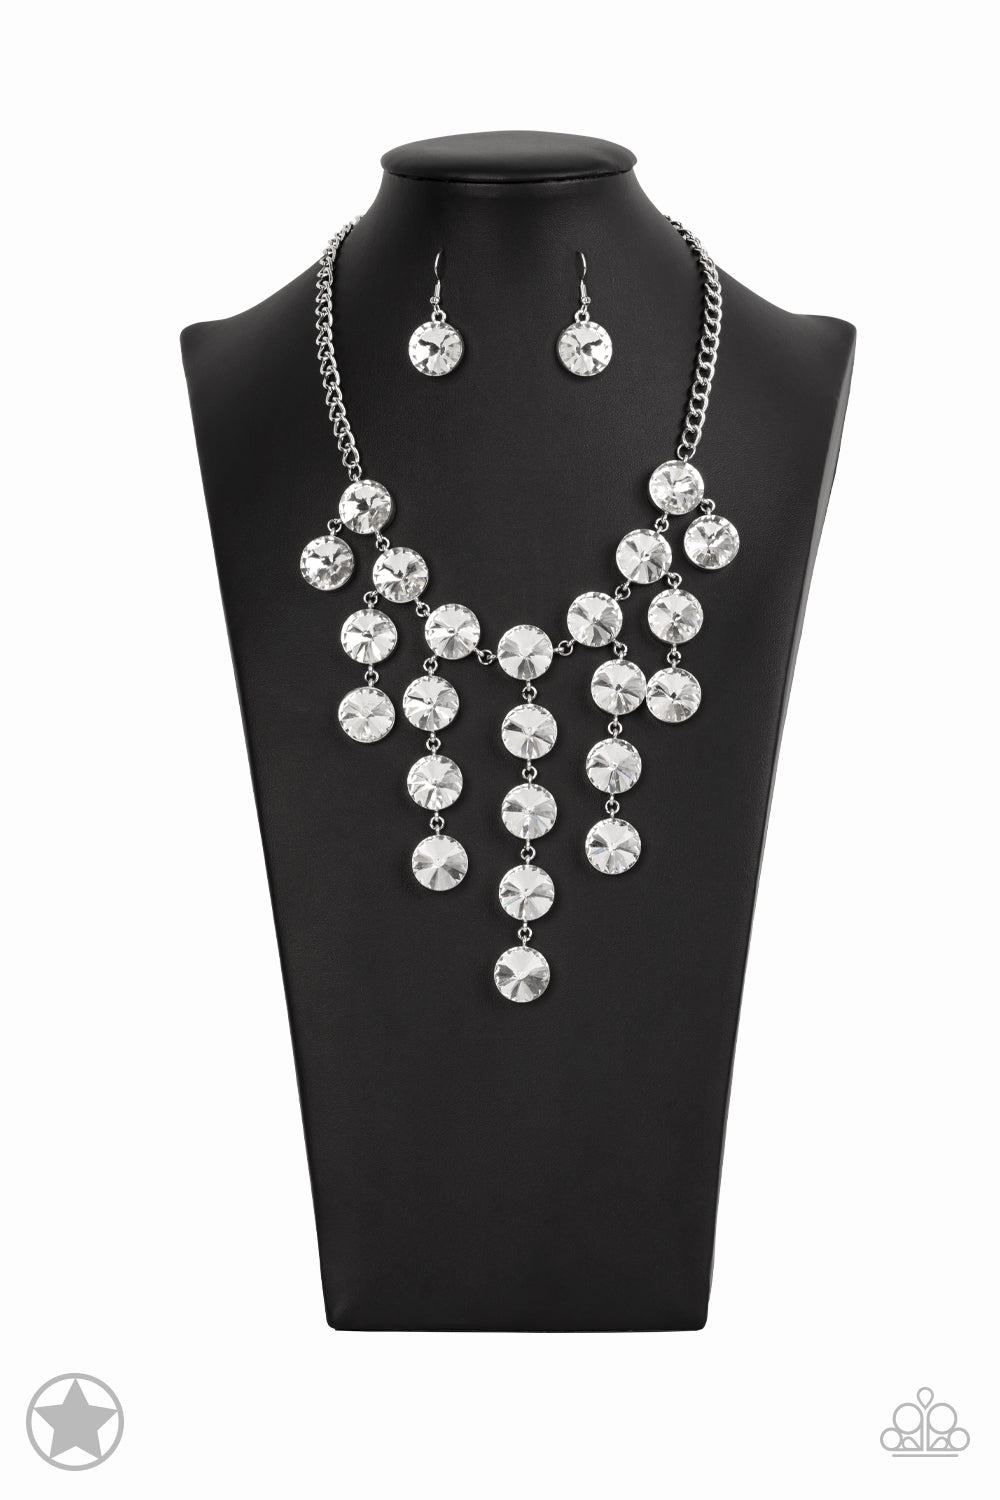 Spotlight Stunner - Silver Fringe Necklace - Paparazzi Accessories - Encased in sleek silver fittings, dramatically oversized white rhinestones delicately link into twinkly tassels that taper off into a jaw-dropping fringe below the collar. Features an adjustable clasp closure. Sold as one individual necklace.